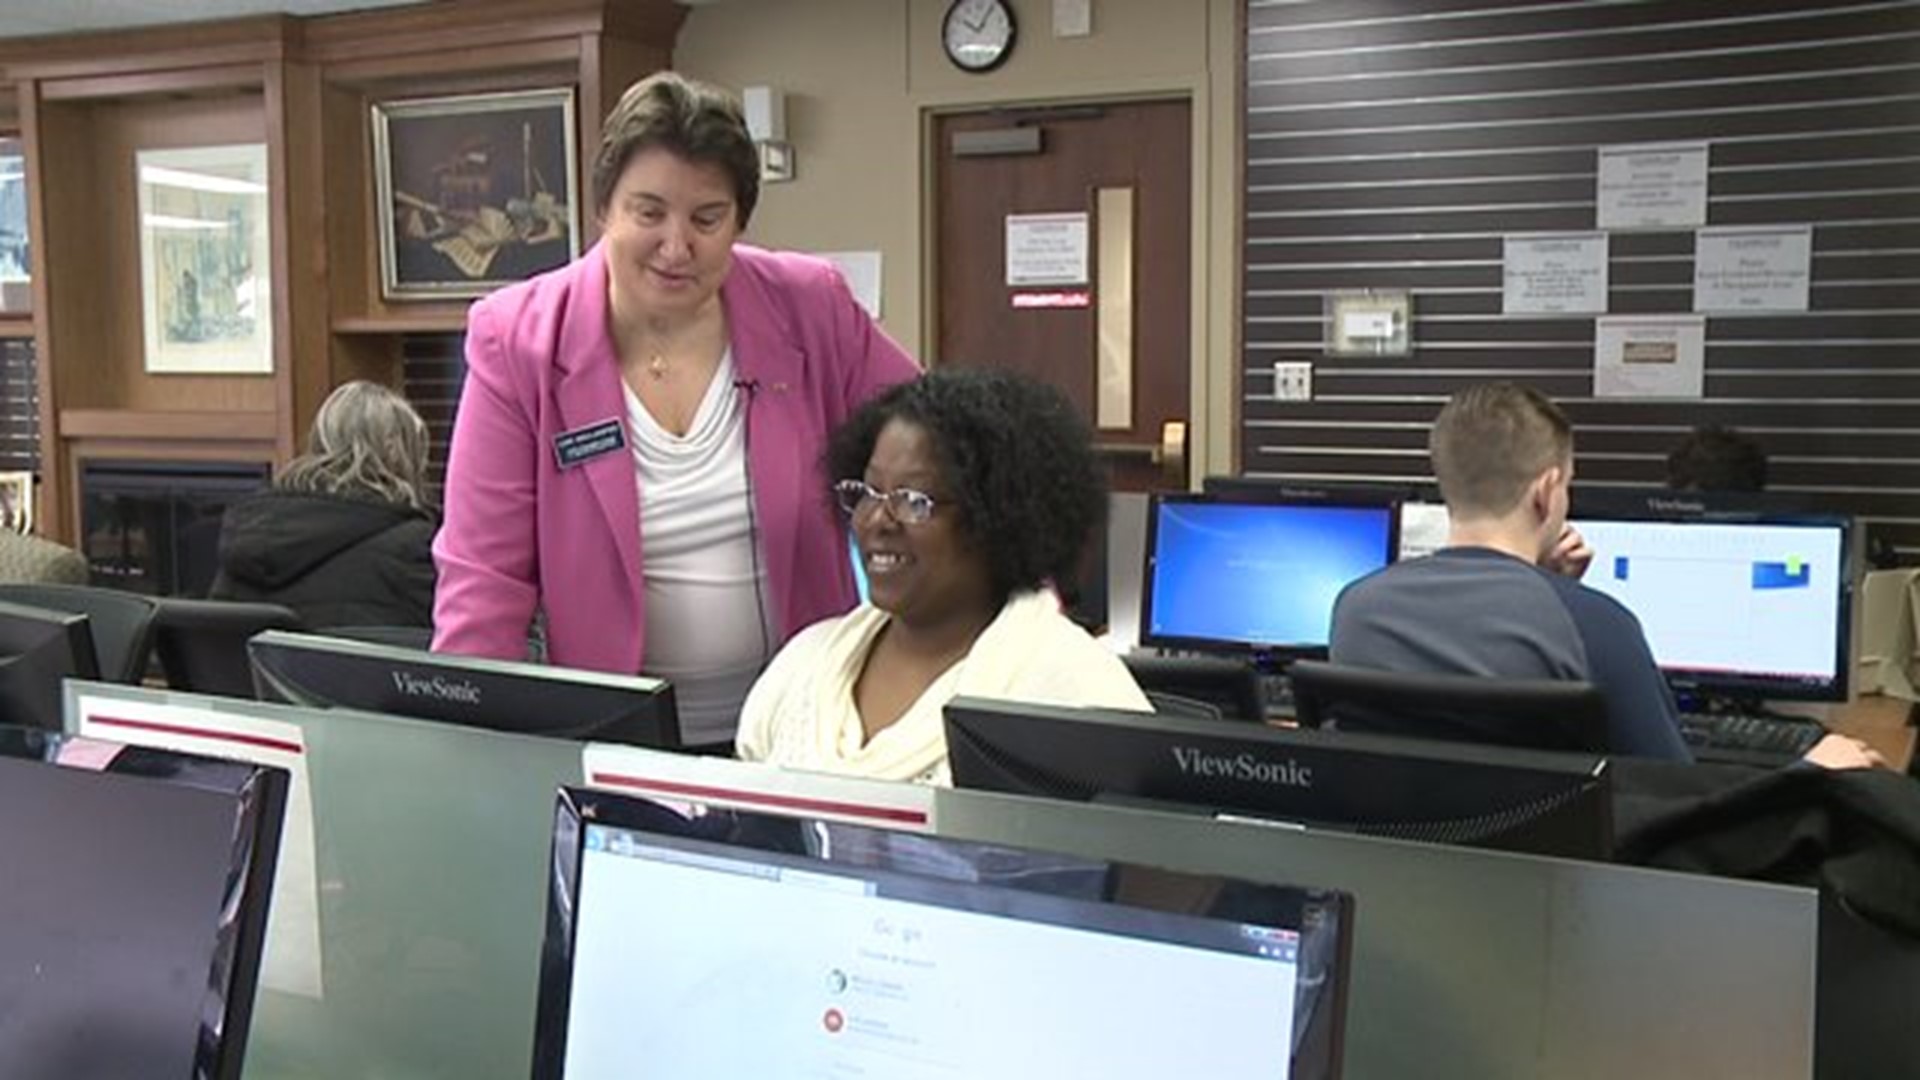 Career Coach online tool helps Park View woman to build a career